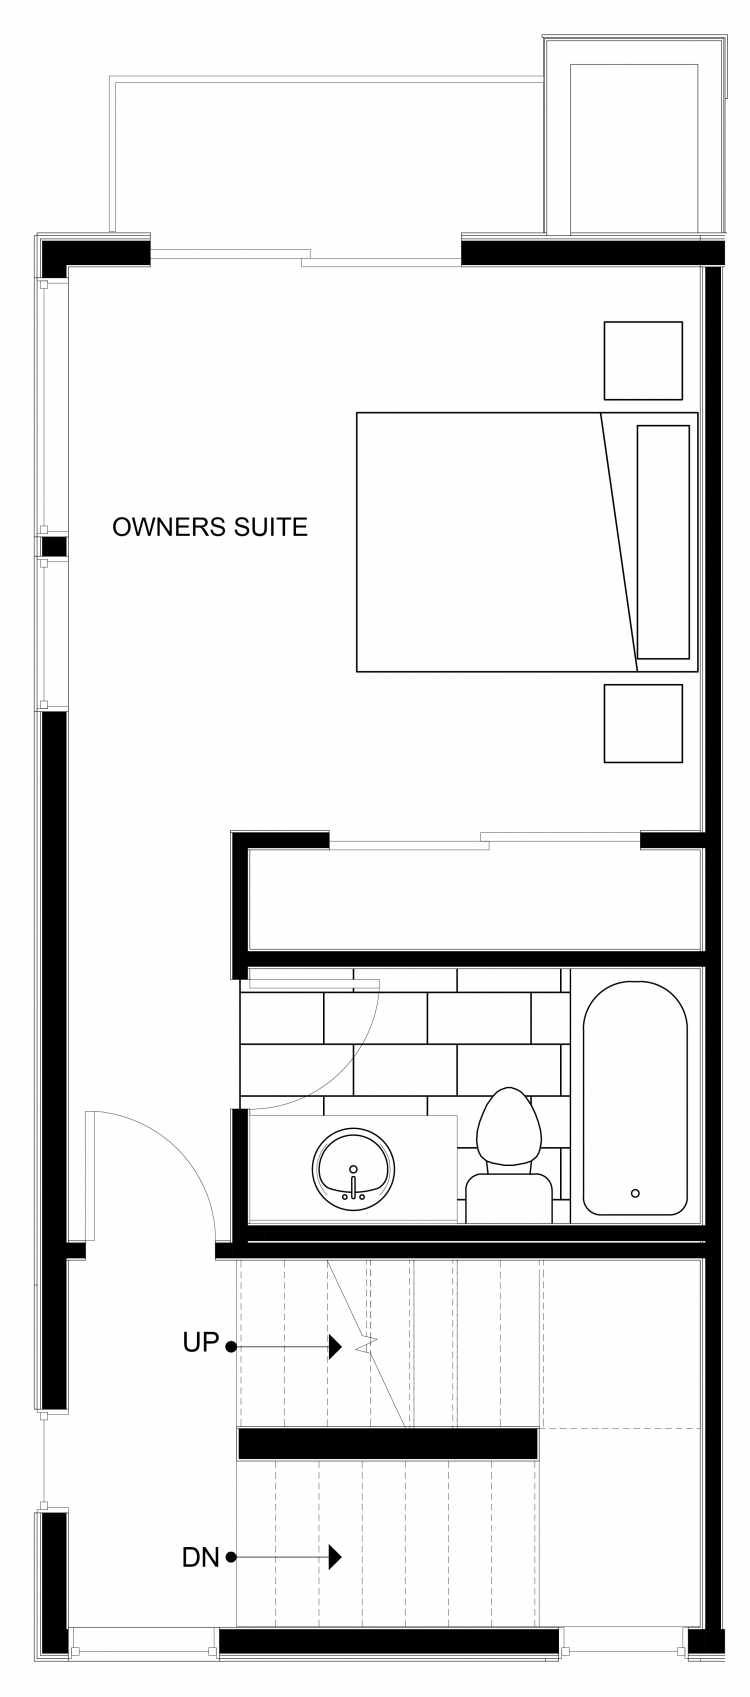 Fourth Floor Plan of 1543 Grandview Pl E, One of the Grandview Townhomes in Capitol Hill